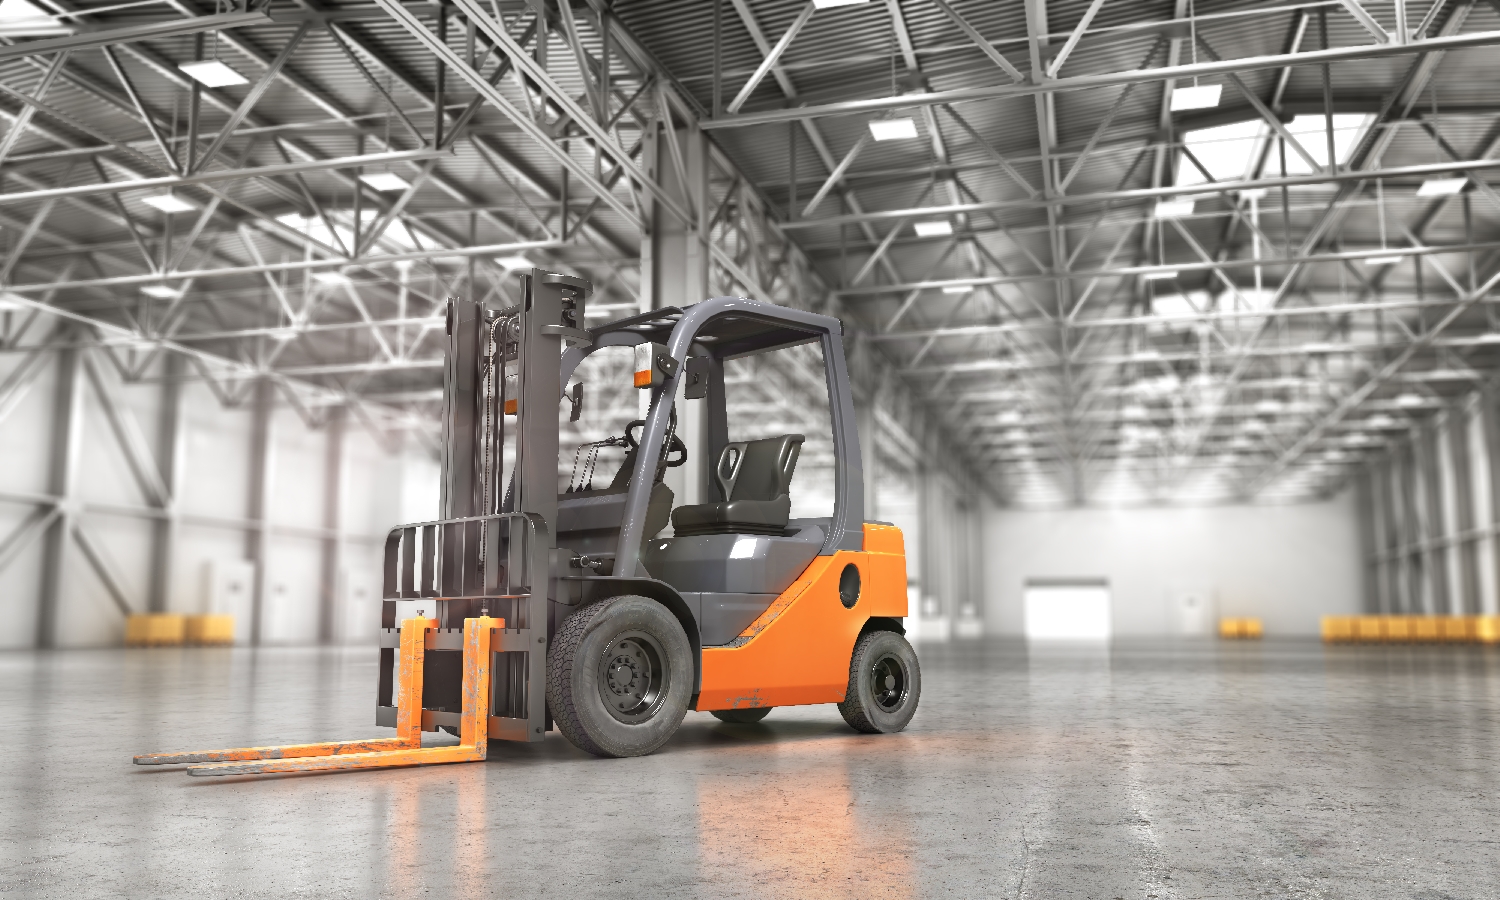 hire an experienced forklift operator